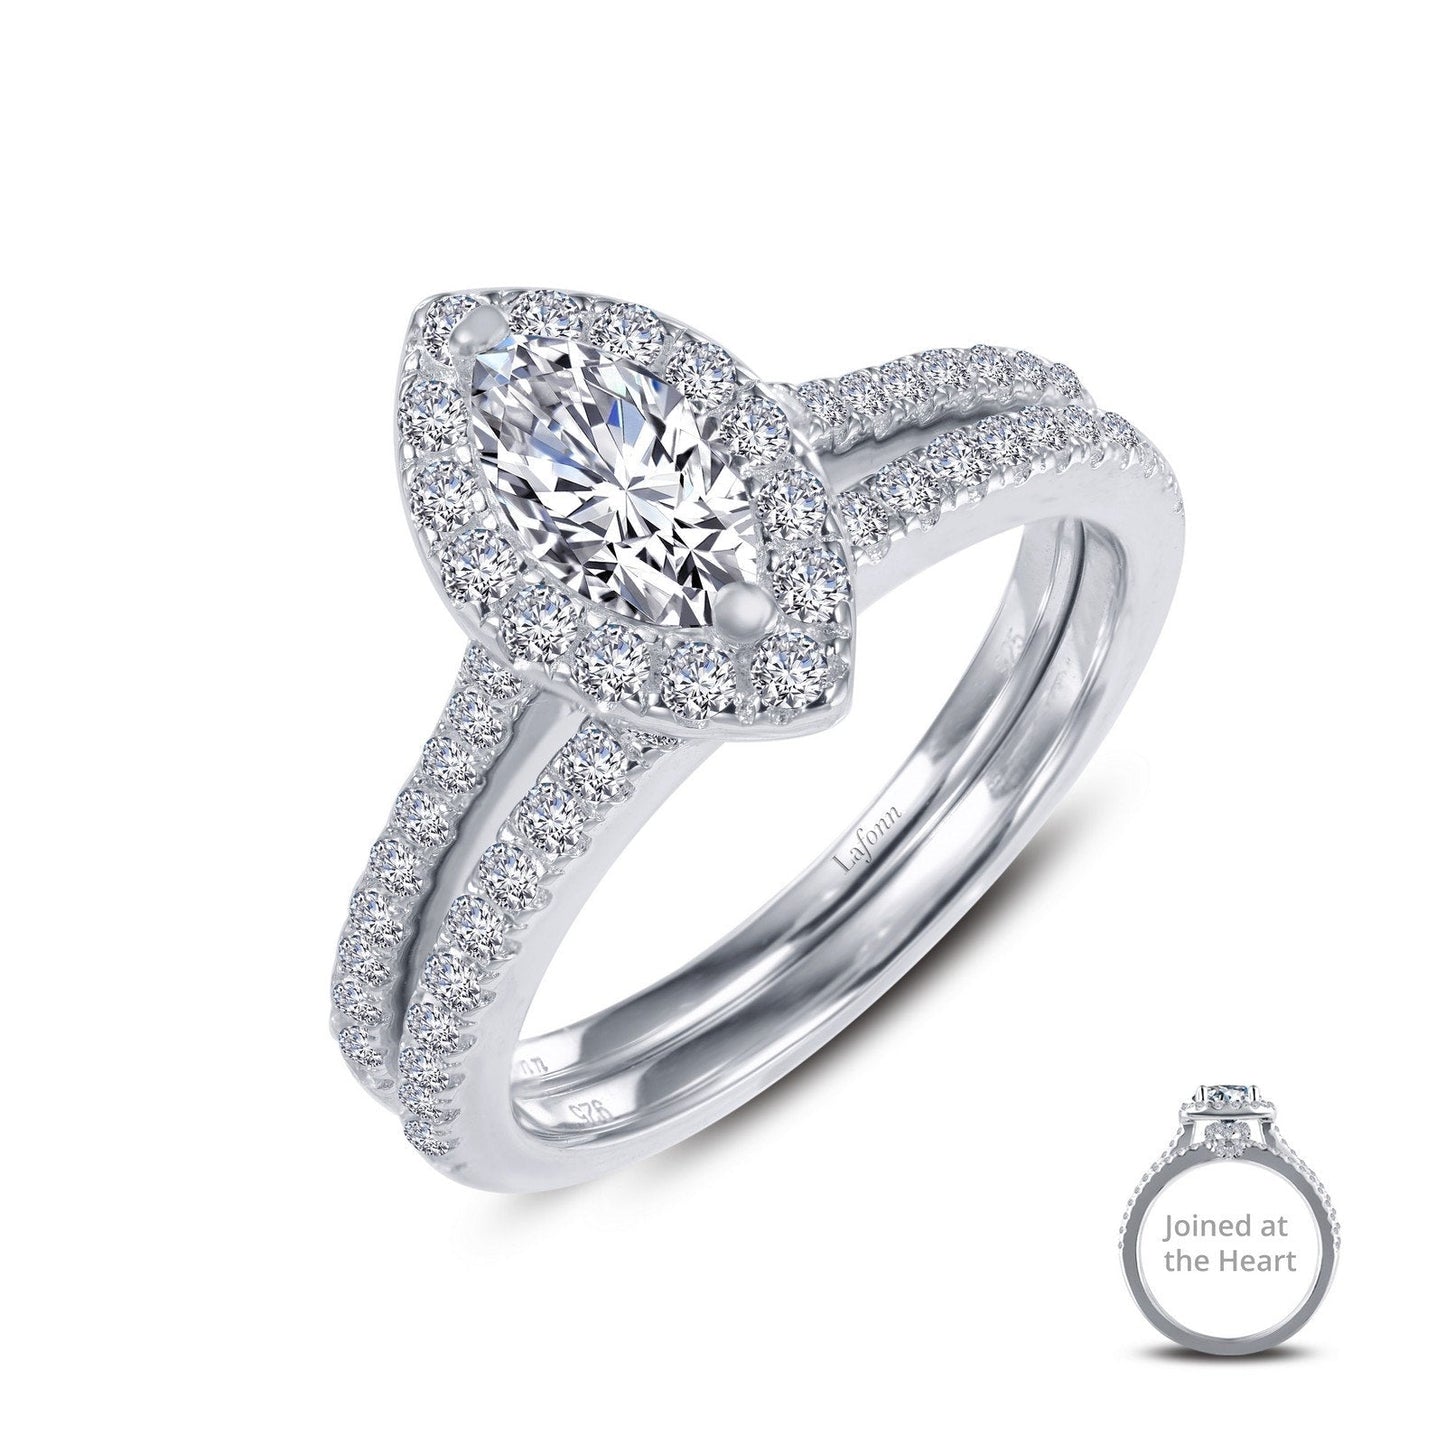 Lafonn Joined-At-The-Heart Wedding Set Simulated Diamond RINGS Size 7 Platinum 1.35 CTS 